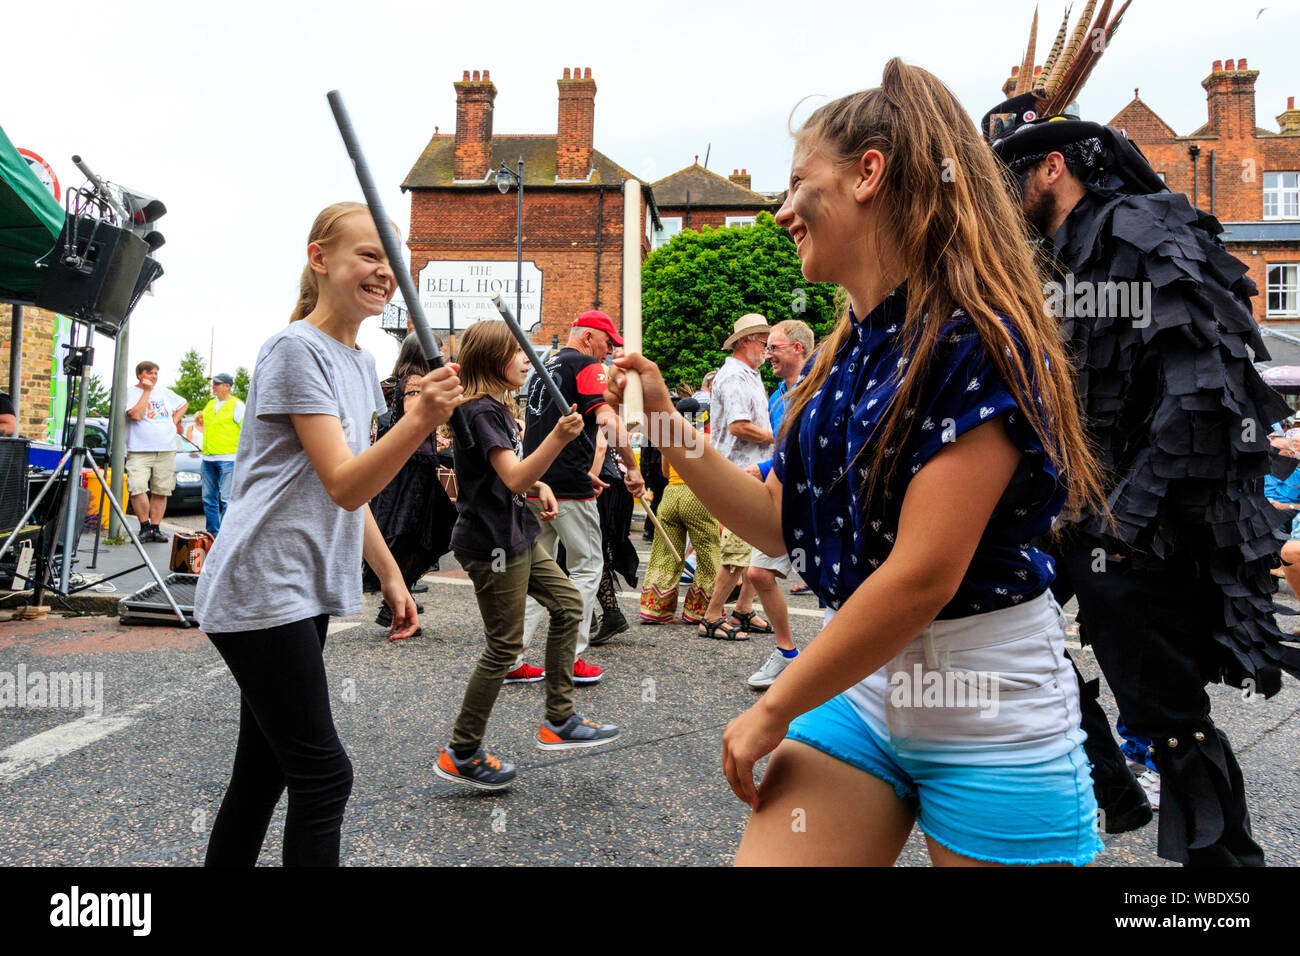 Sandwich folk and Ale Festival. Traditional morris dance outdoor workshop with people dancing in the street.Two young teenage girls dancing. Stock Photo